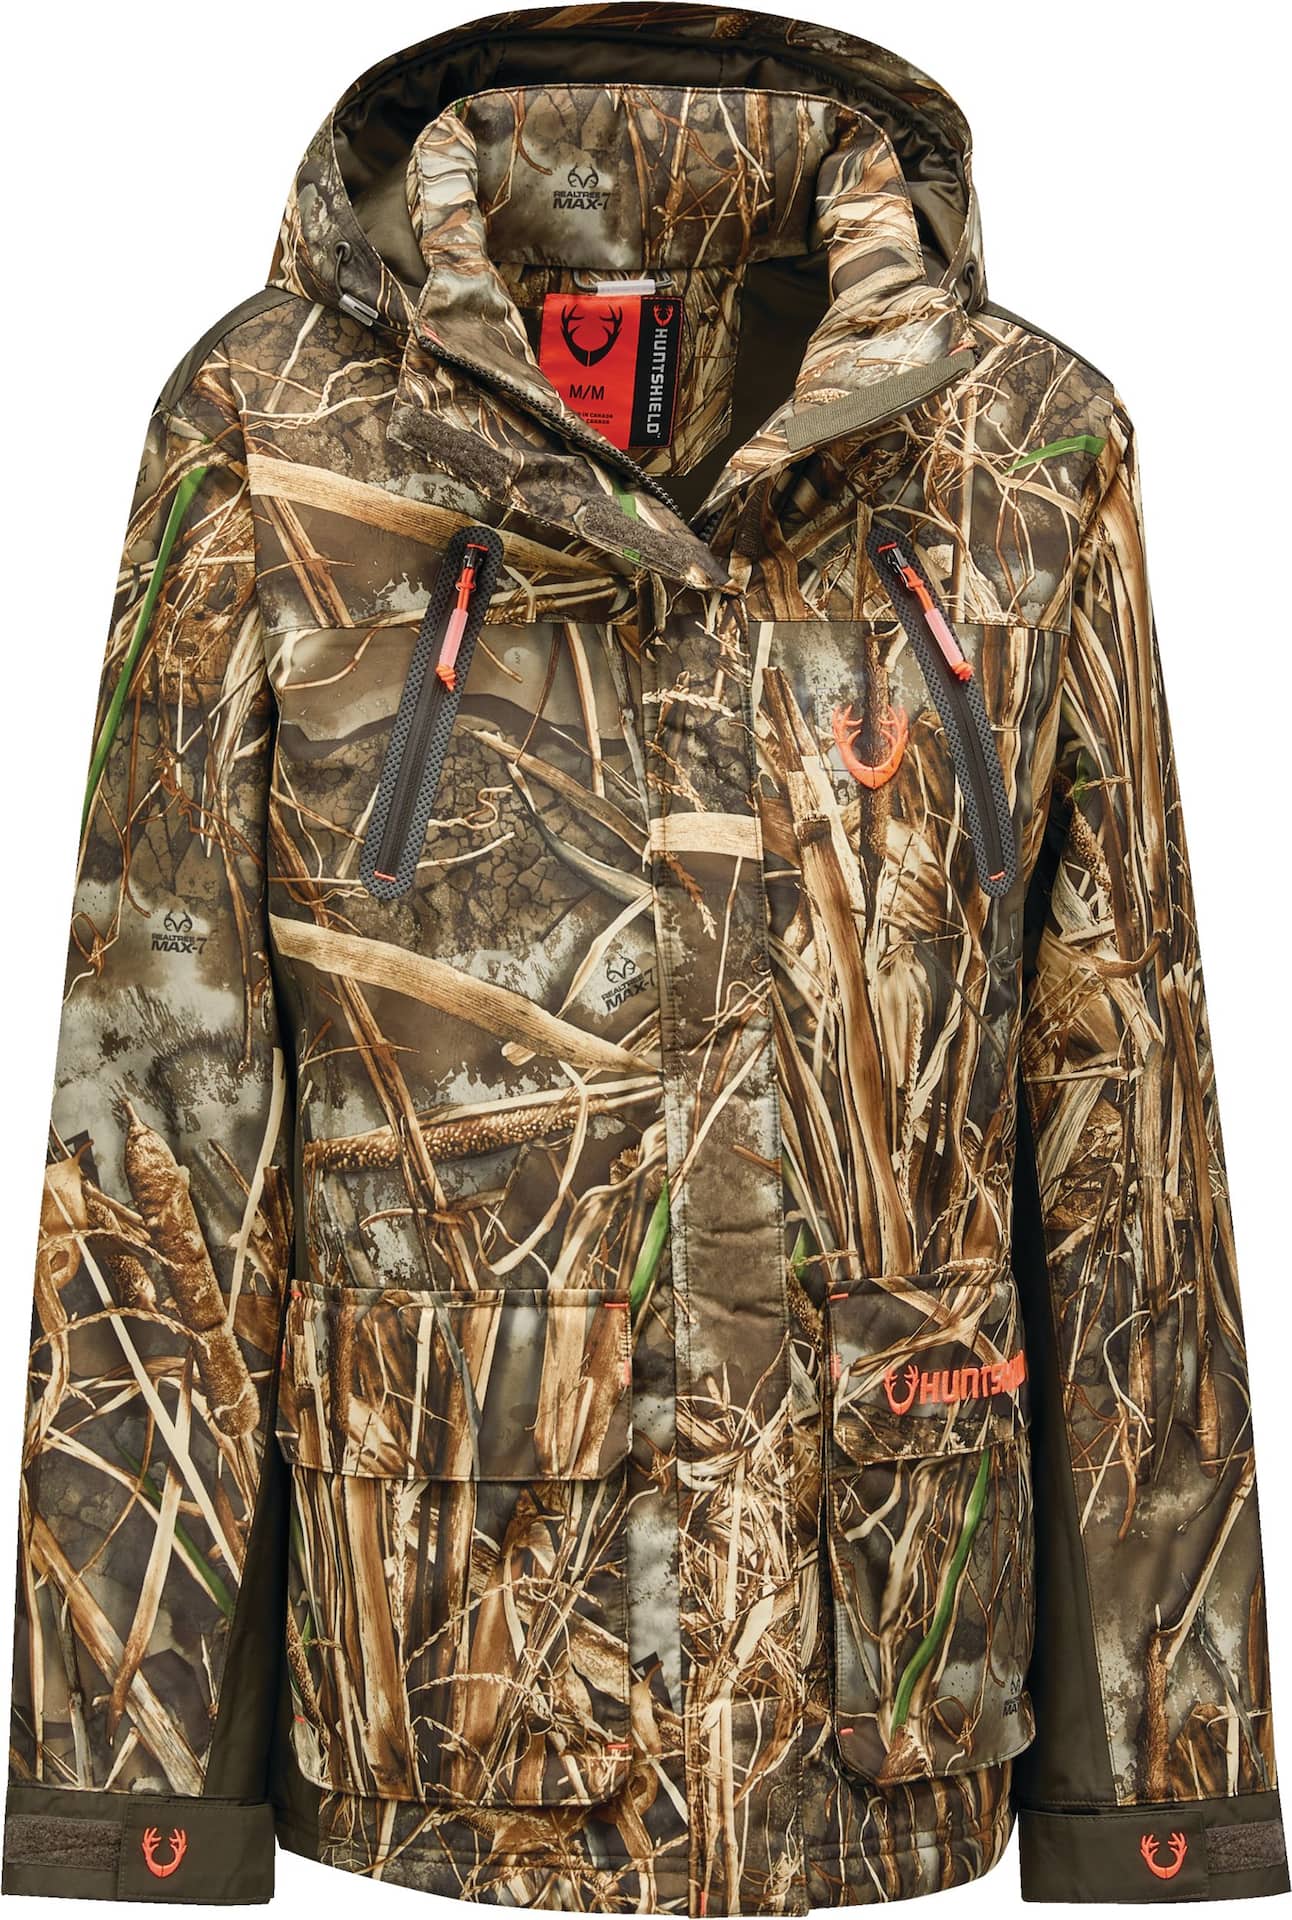 Huntshield Women's Surface Waterfowl Hunting Jacket with Polyfil